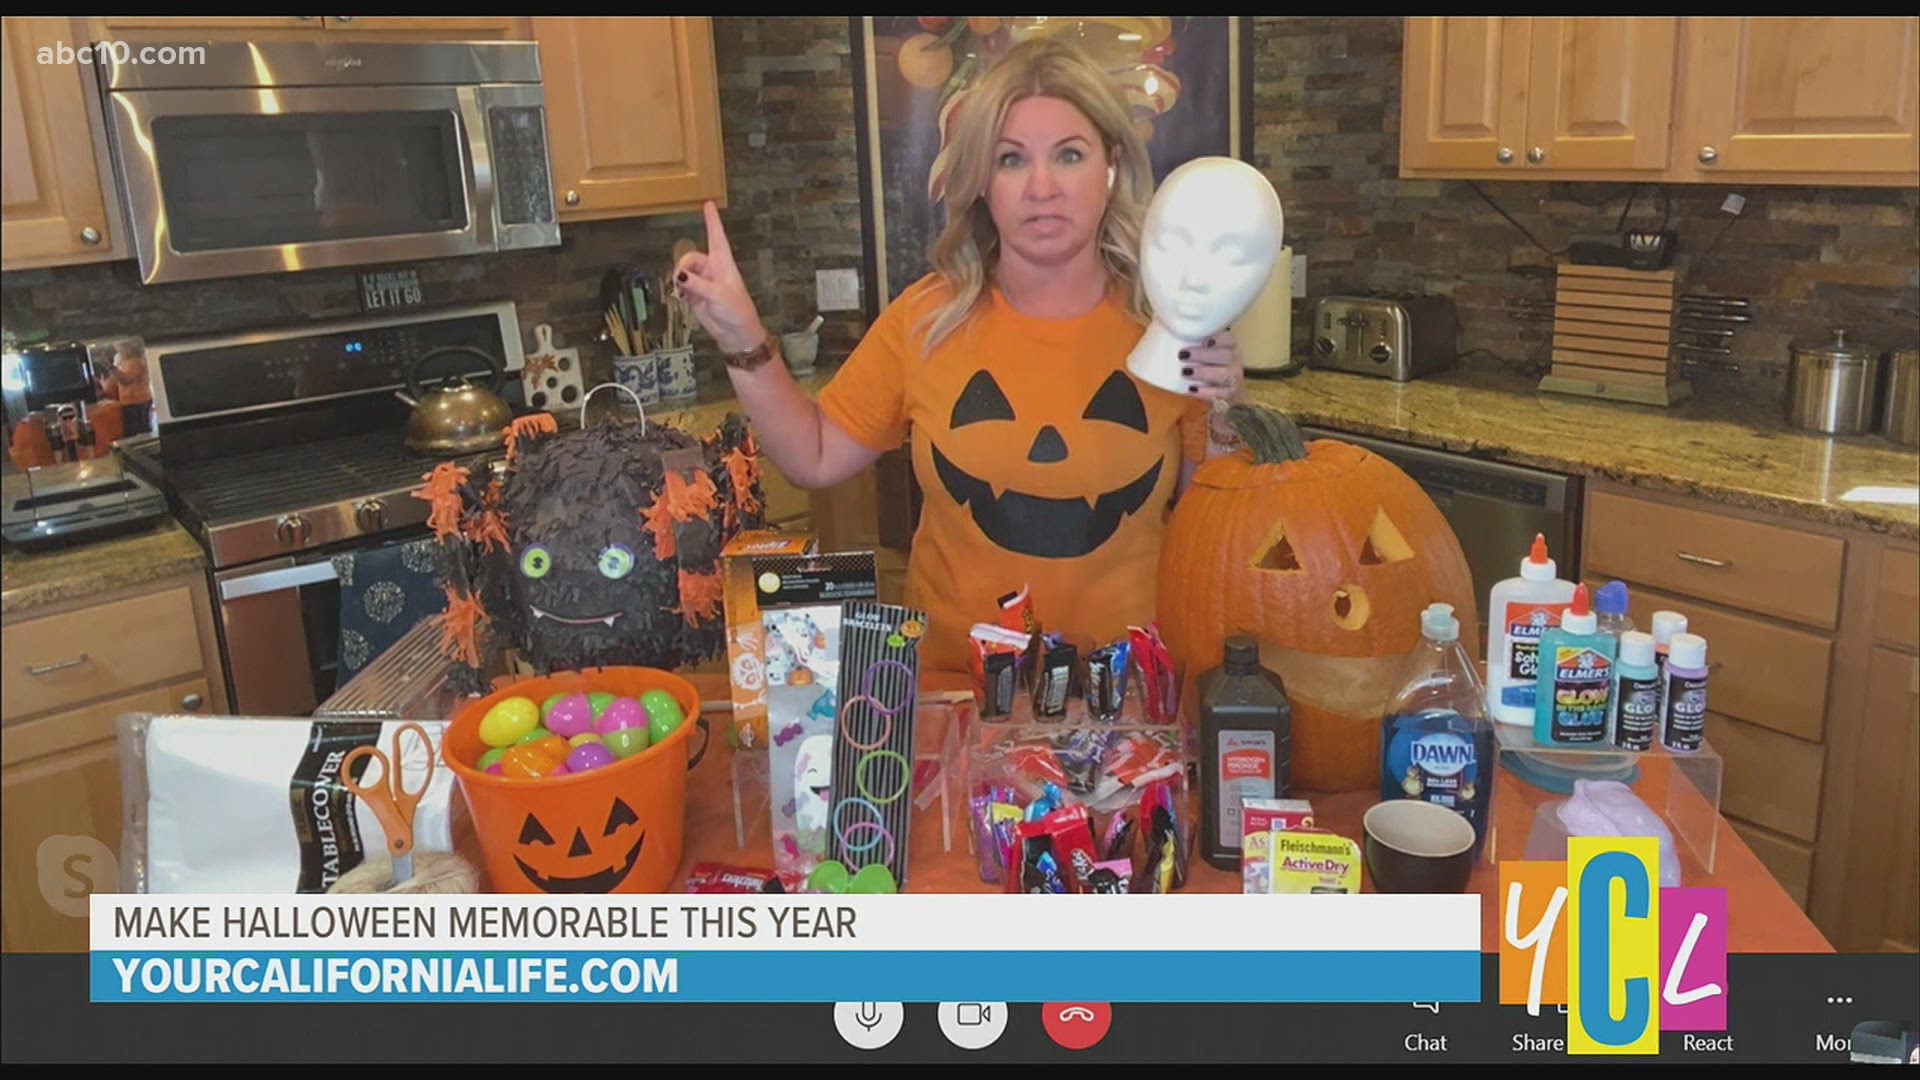 Lifestyle and parenting expert, Sherri French is here today to share creative ideas to make your Halloween memorable for your family, even if you are at home.